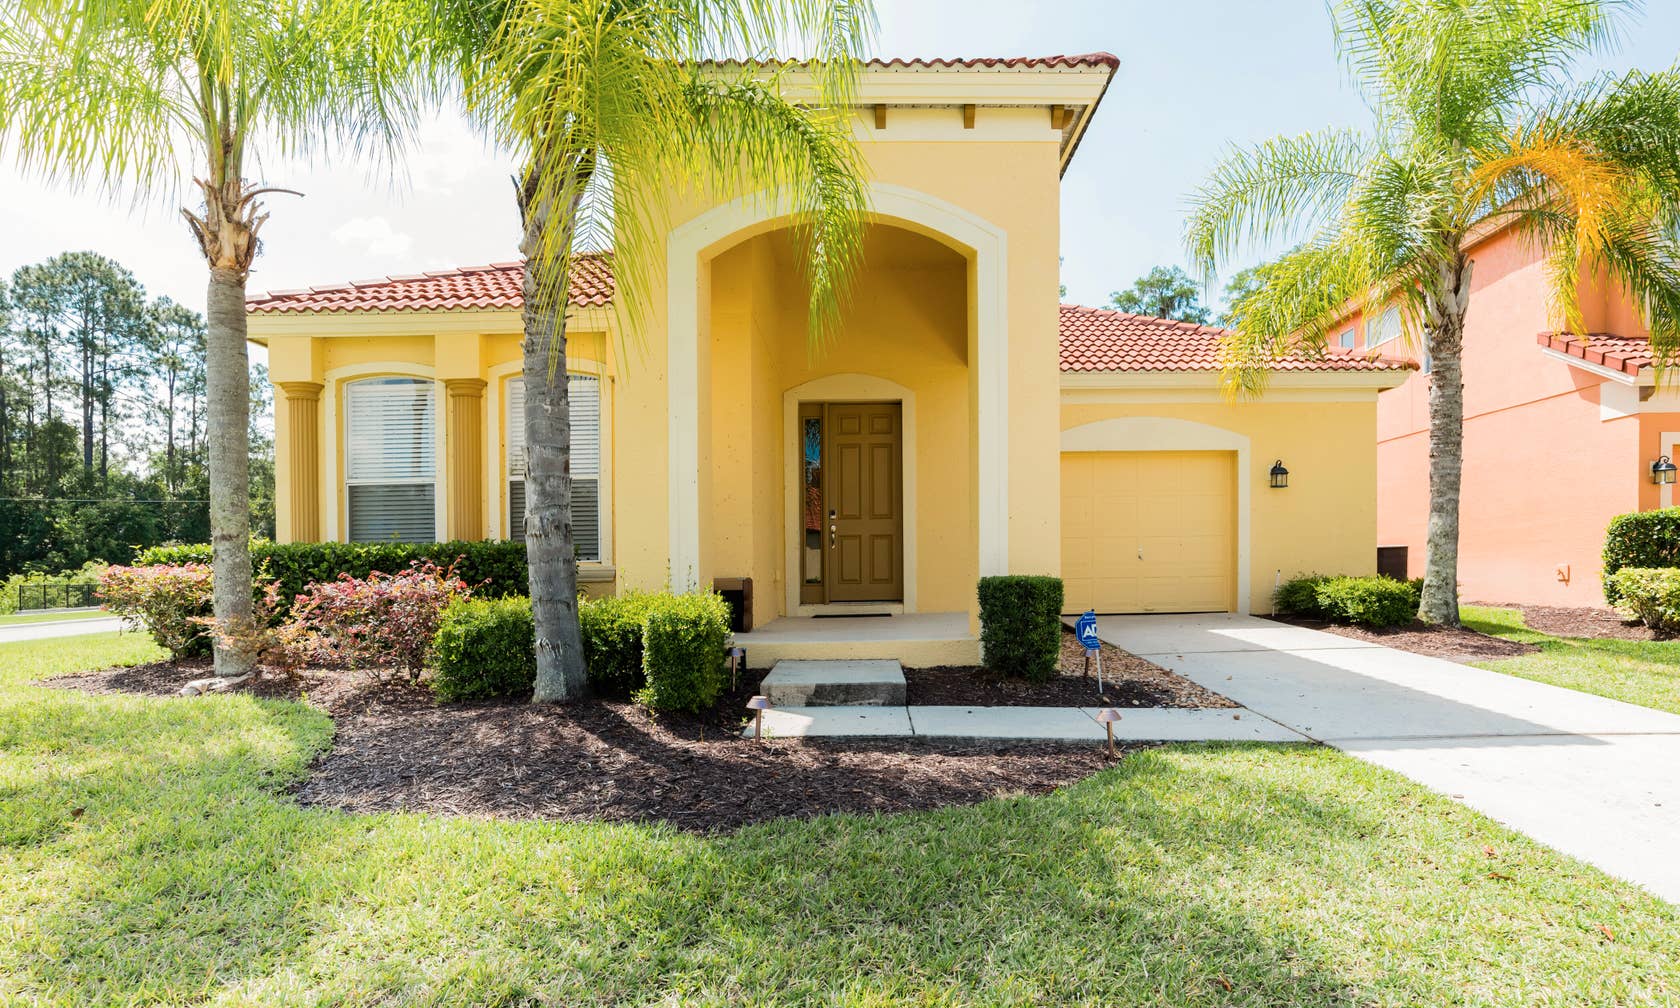 Holiday rentals in Kissimmee